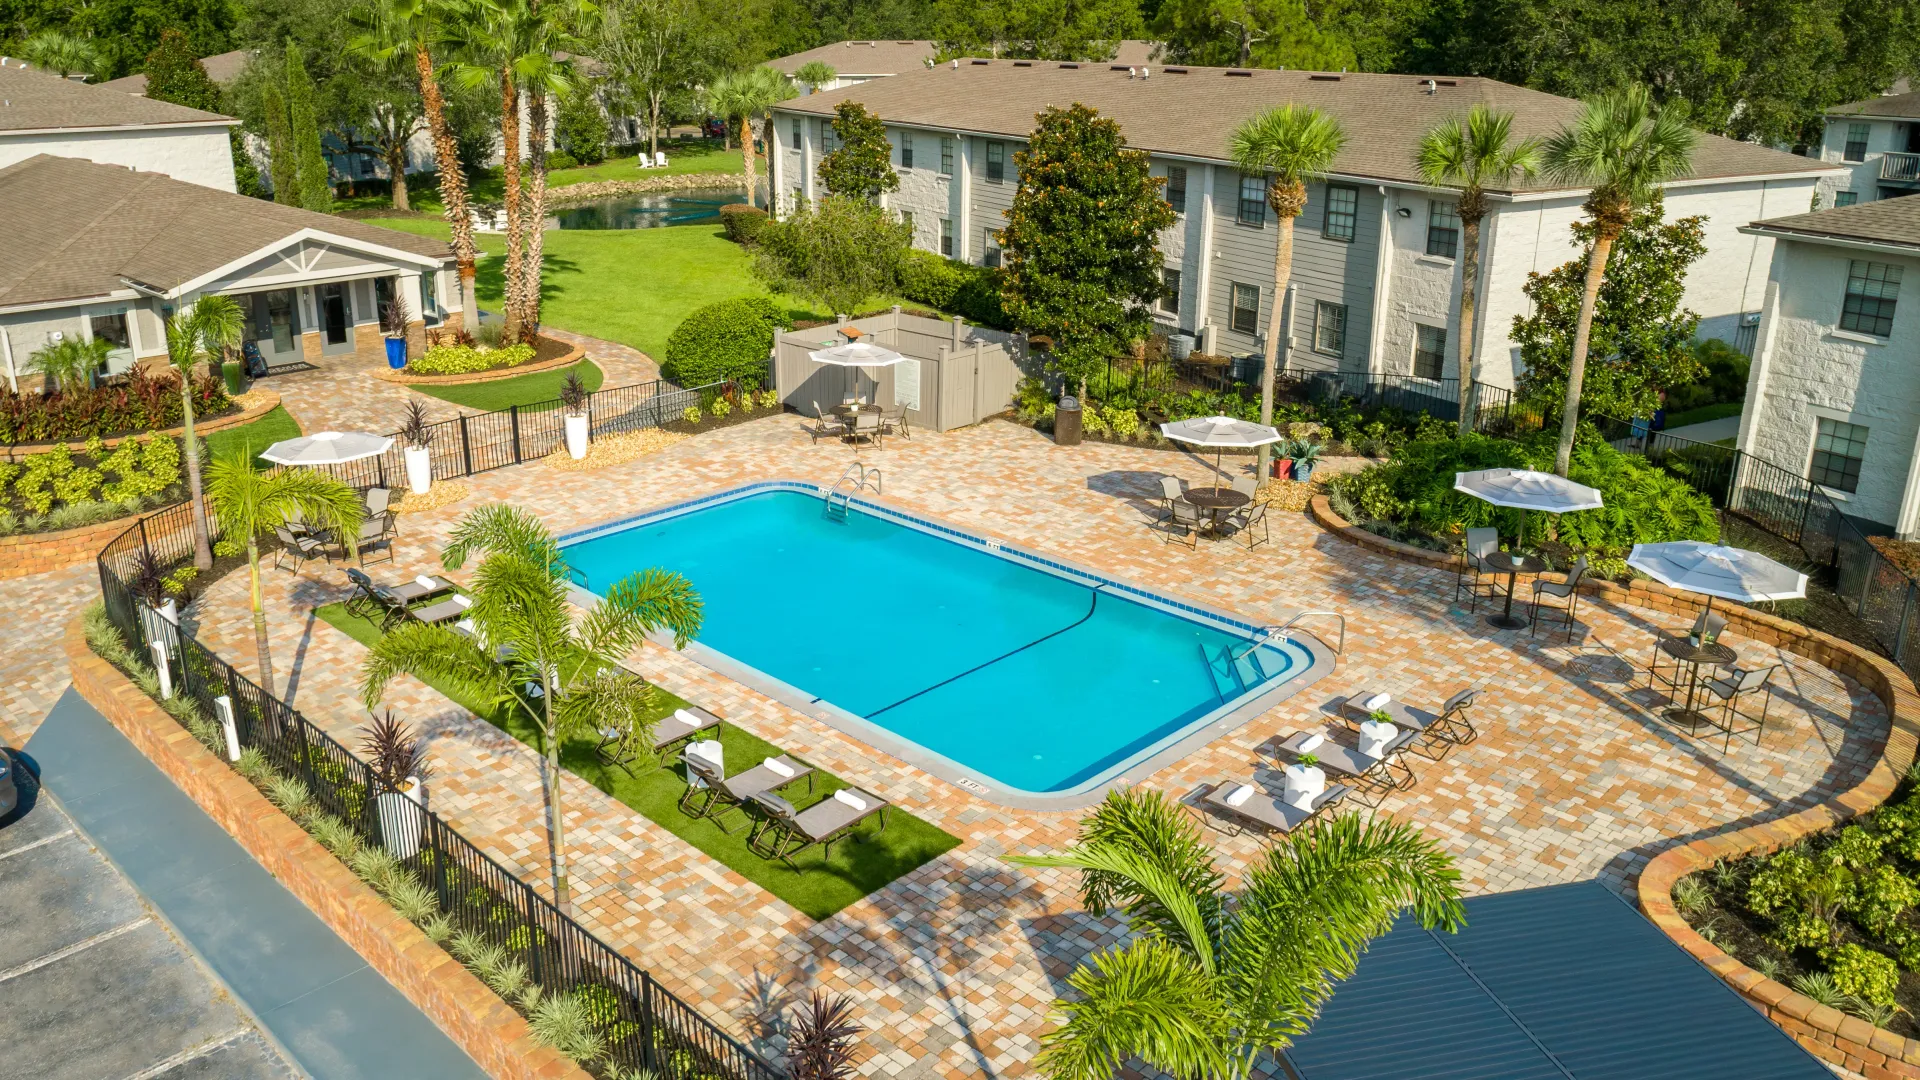 An enchanting bird’s eye view of a paradise-like sundeck with rows of poolside loungers and umbrella-covered tables, set against a backdrop of tropical palm trees and elegant pavers stretching from around the pool and leading to the leasing center.